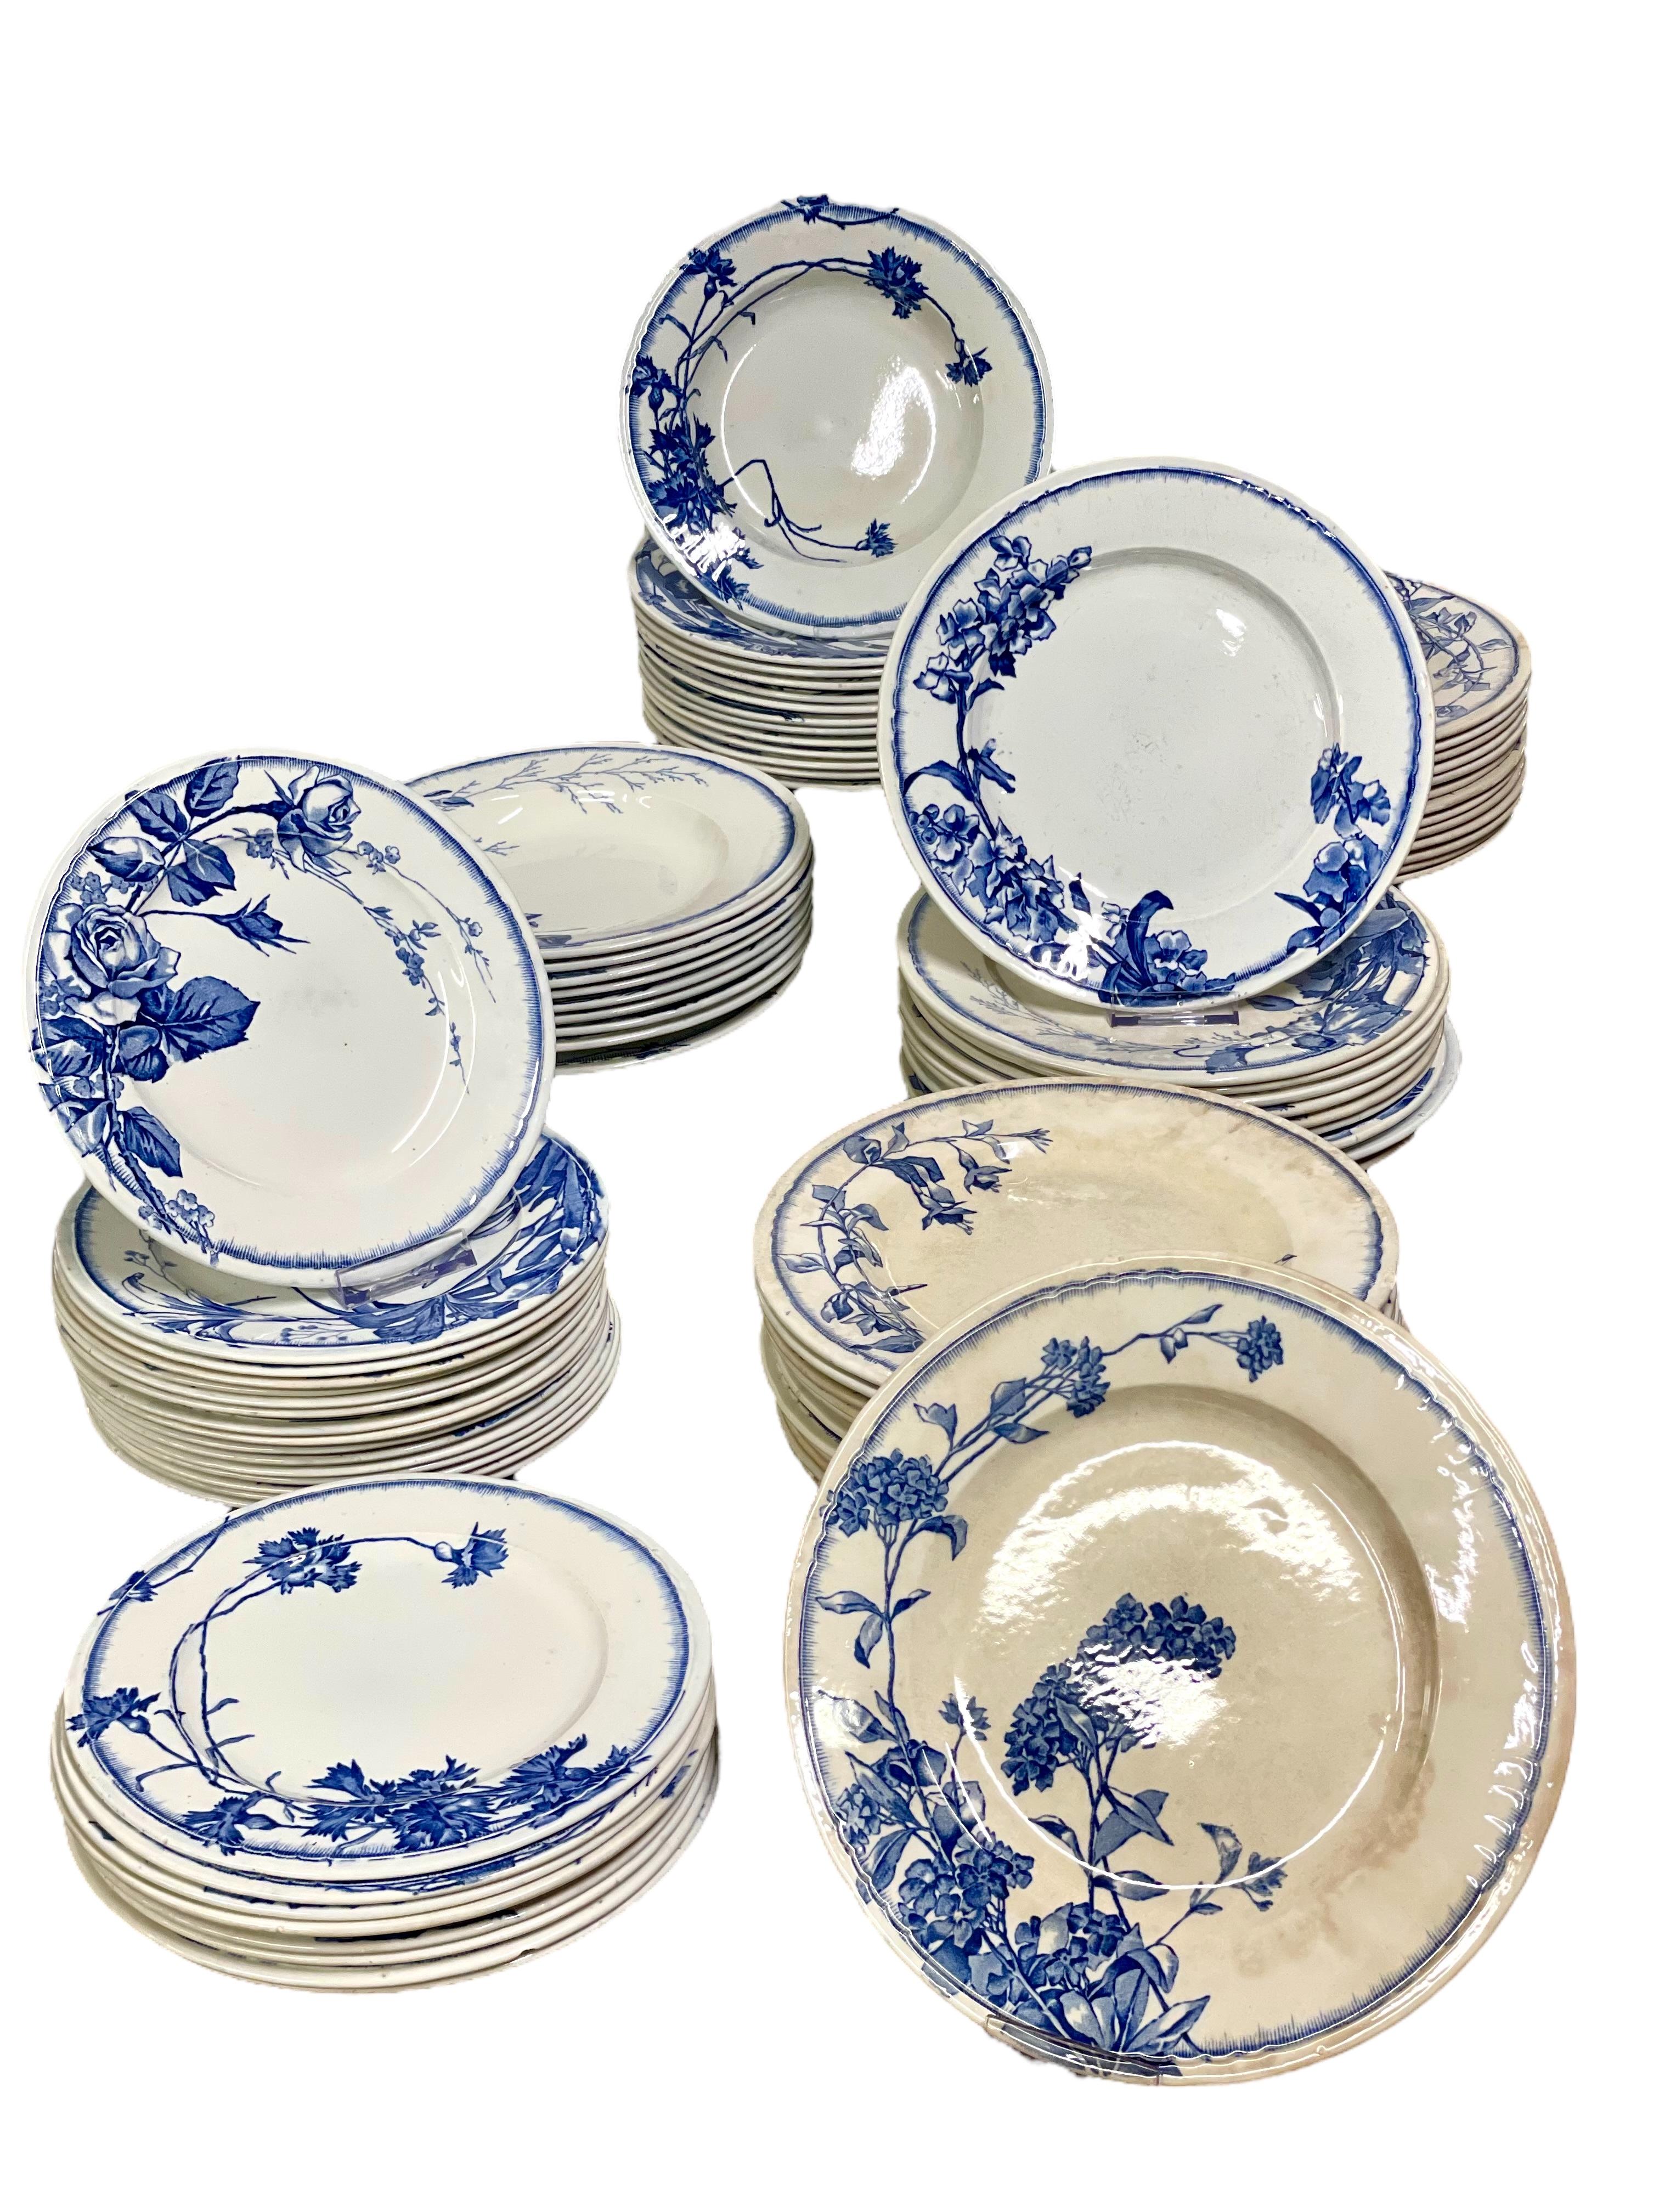 An exceptional rare dinner service of 92 pieces in fine French earthenware, made by the esteemed faience manufacturer Jules Vieillard of Bordeaux. The charming blue and white design is 'Chevreuse', which refers to an old-fashioned French peach